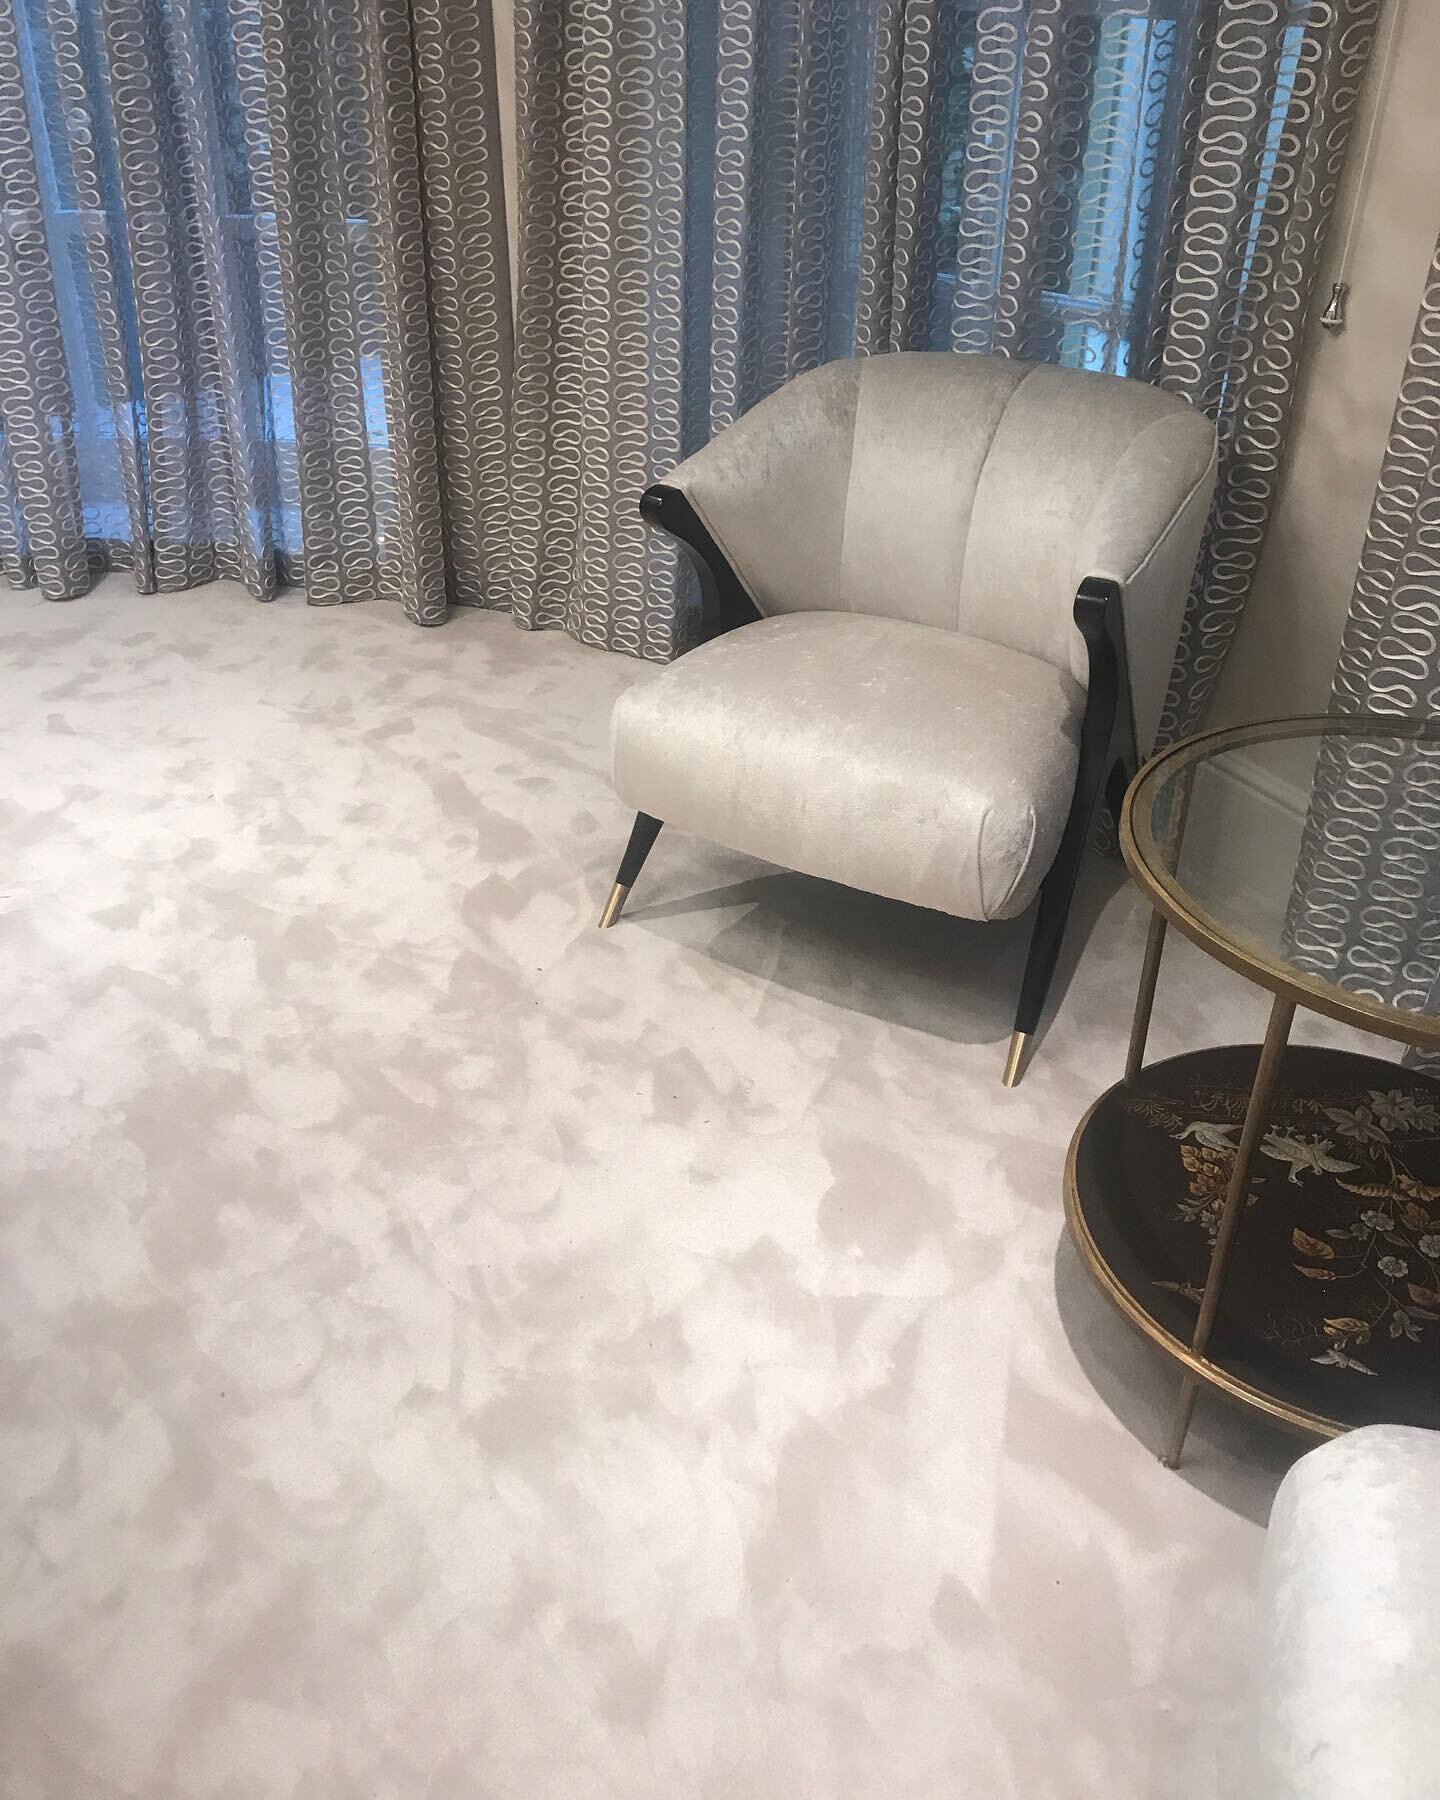 Silky Soft carpet from @stevenfosterlondon supplied and installed for our client in Mayfair.

We work with the trade, supplying and installing luxury carpets and rugs throughout the UK and abroad for interior designers and architects, residential and